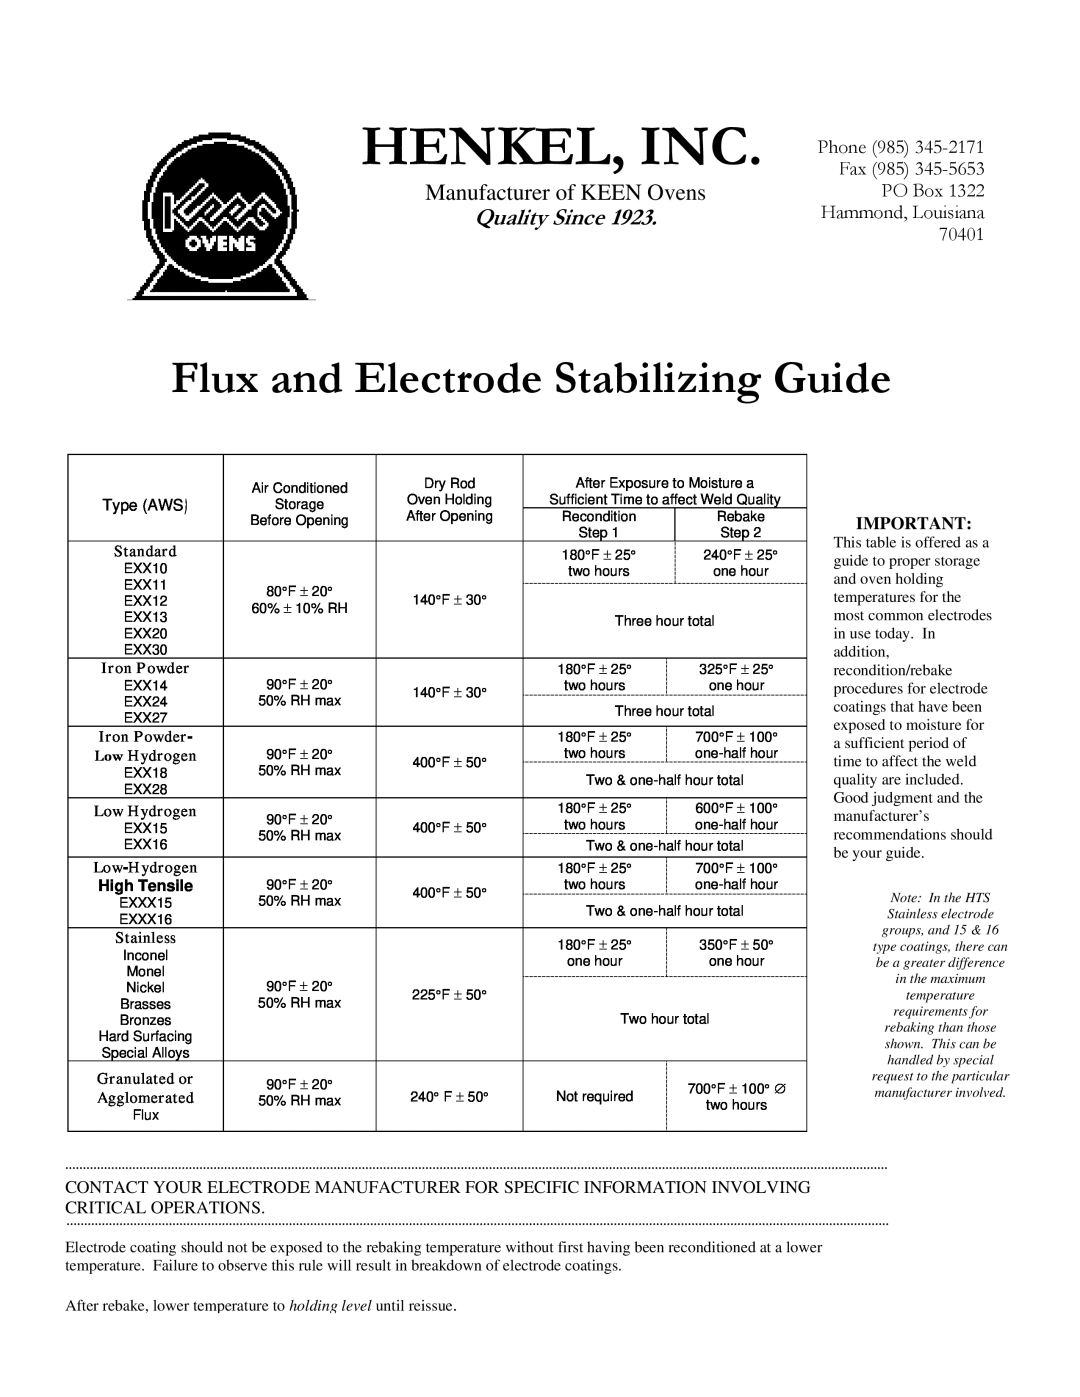 Henkel K-450 Henkel, Inc, Flux and Electrode Stabilizing Guide, Quality Since, Phone 985 Fax 985 PO Box Hammond, Louisiana 